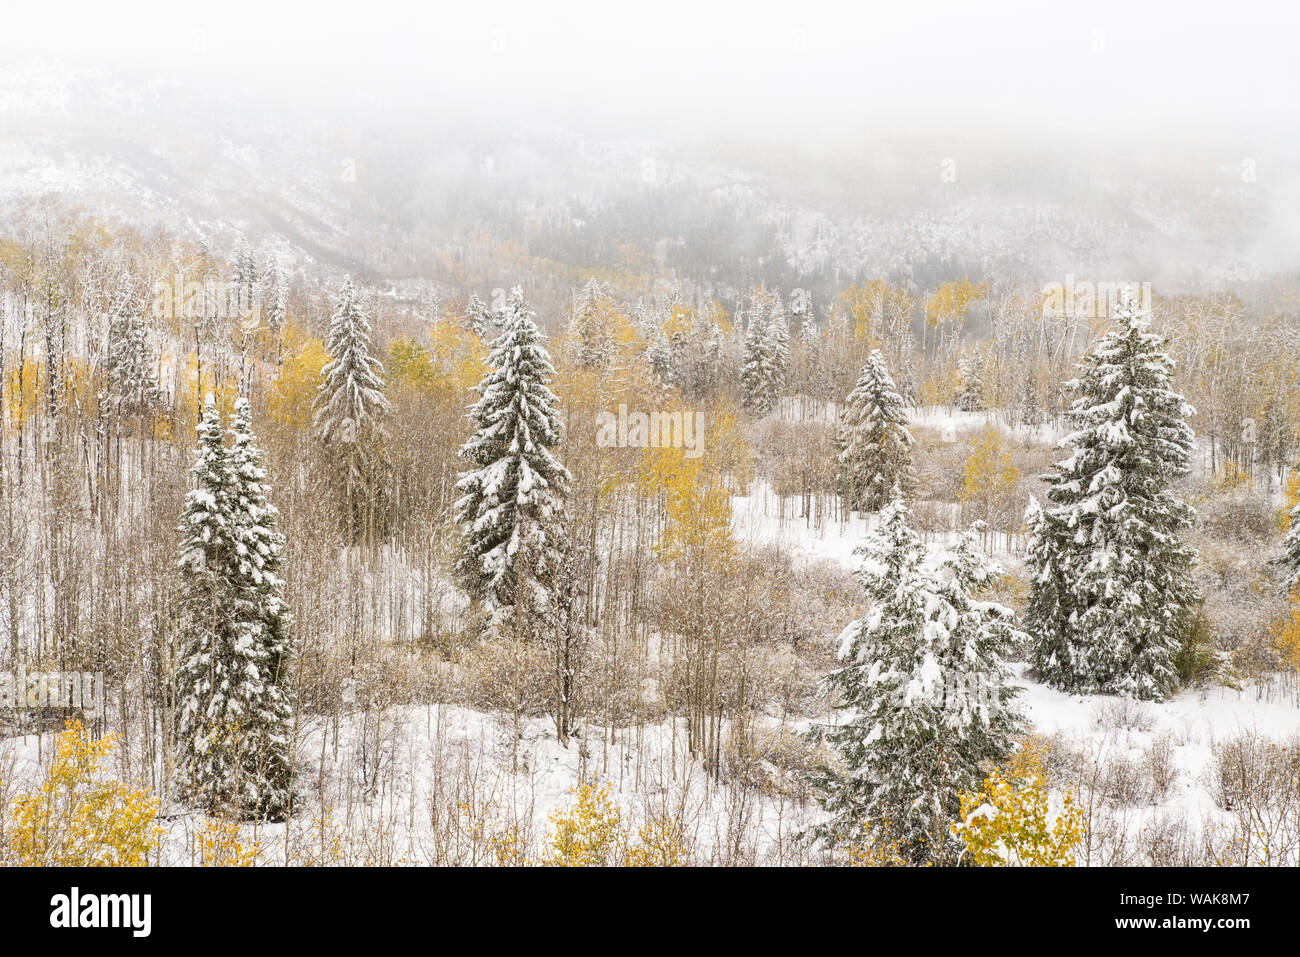 USA, Colorado, White River National Forest. Snowstorm on forest. Credit as: Don Grall / Jaynes Gallery / DanitaDelimont.com Stock Photo